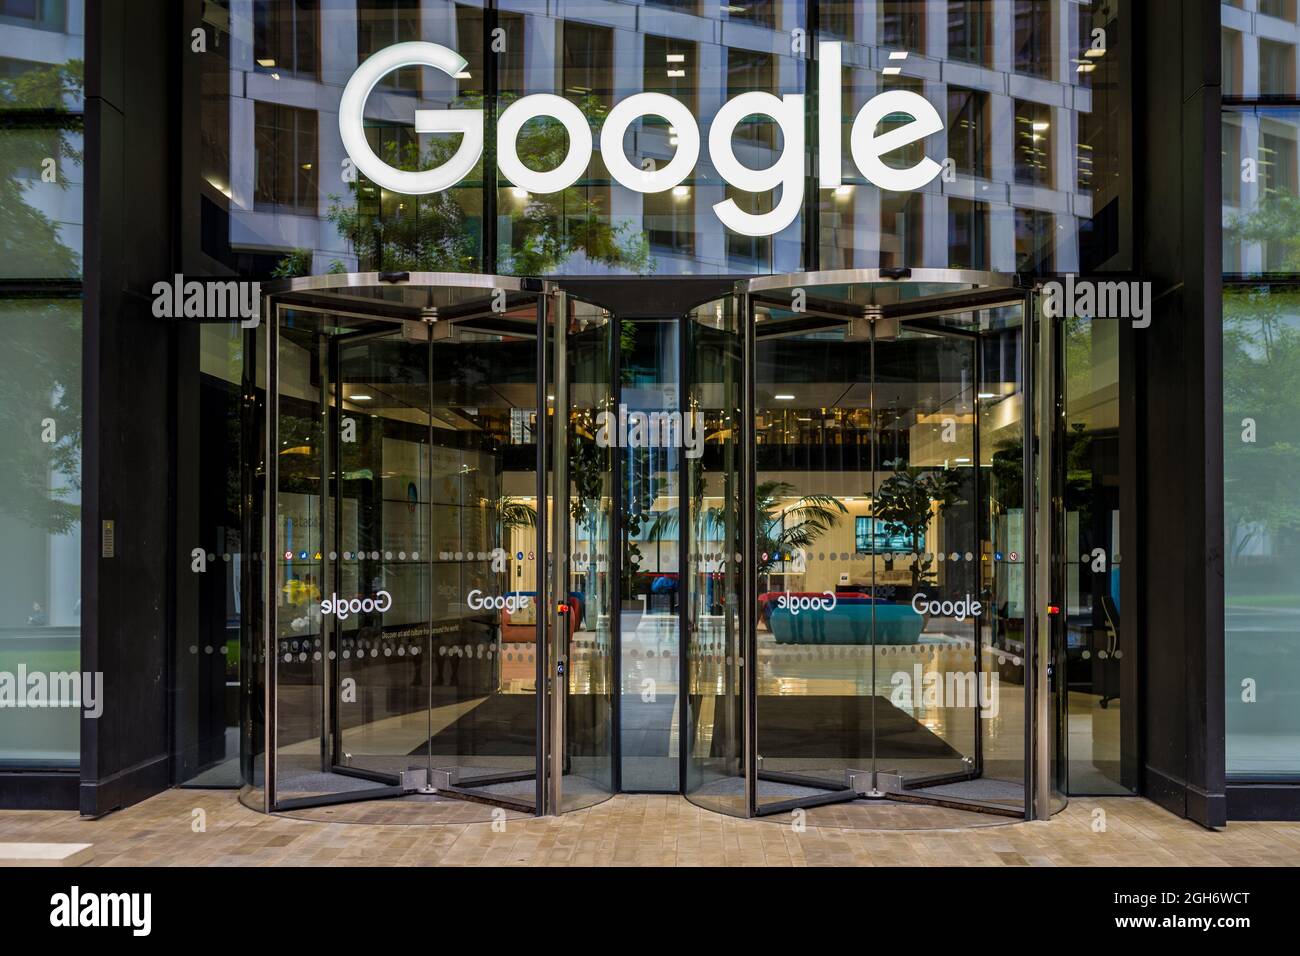 Google London HQ - The Google UK and Youtube London offices at 6 Pancras Square near King's Cross Station in central London UK Stock Photo